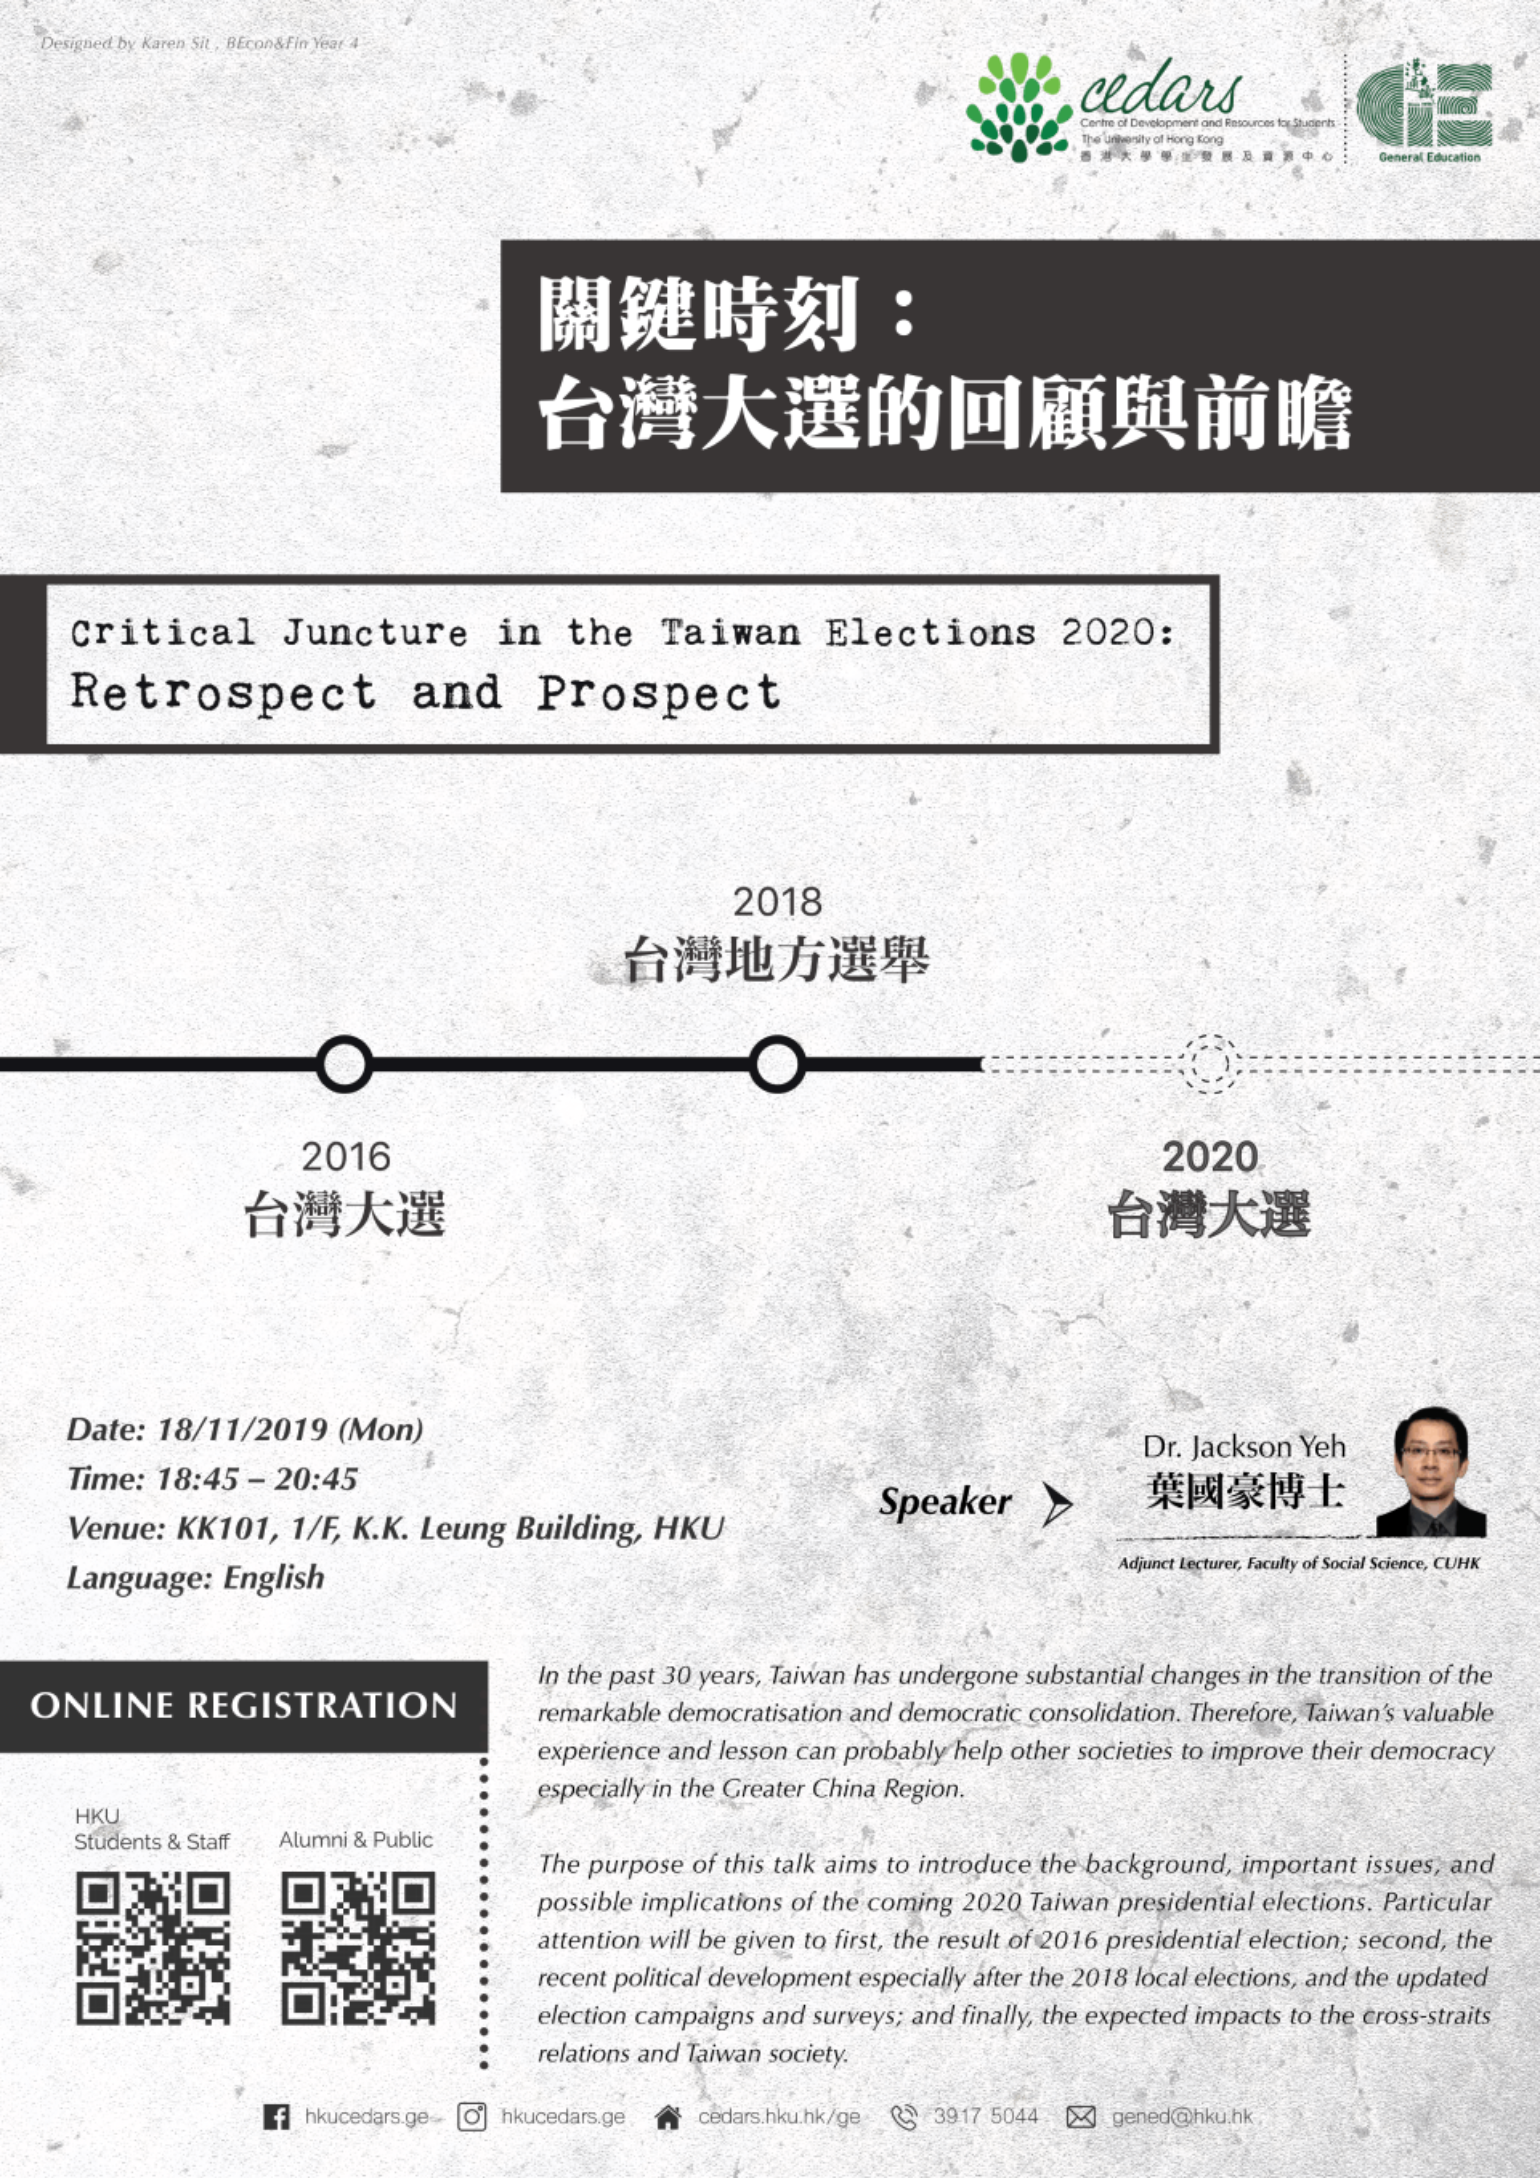 Critical Juncture in the Taiwan Elections 2020: Retrospect and Prospect 關鍵時刻：台灣大選的回顧與前瞻